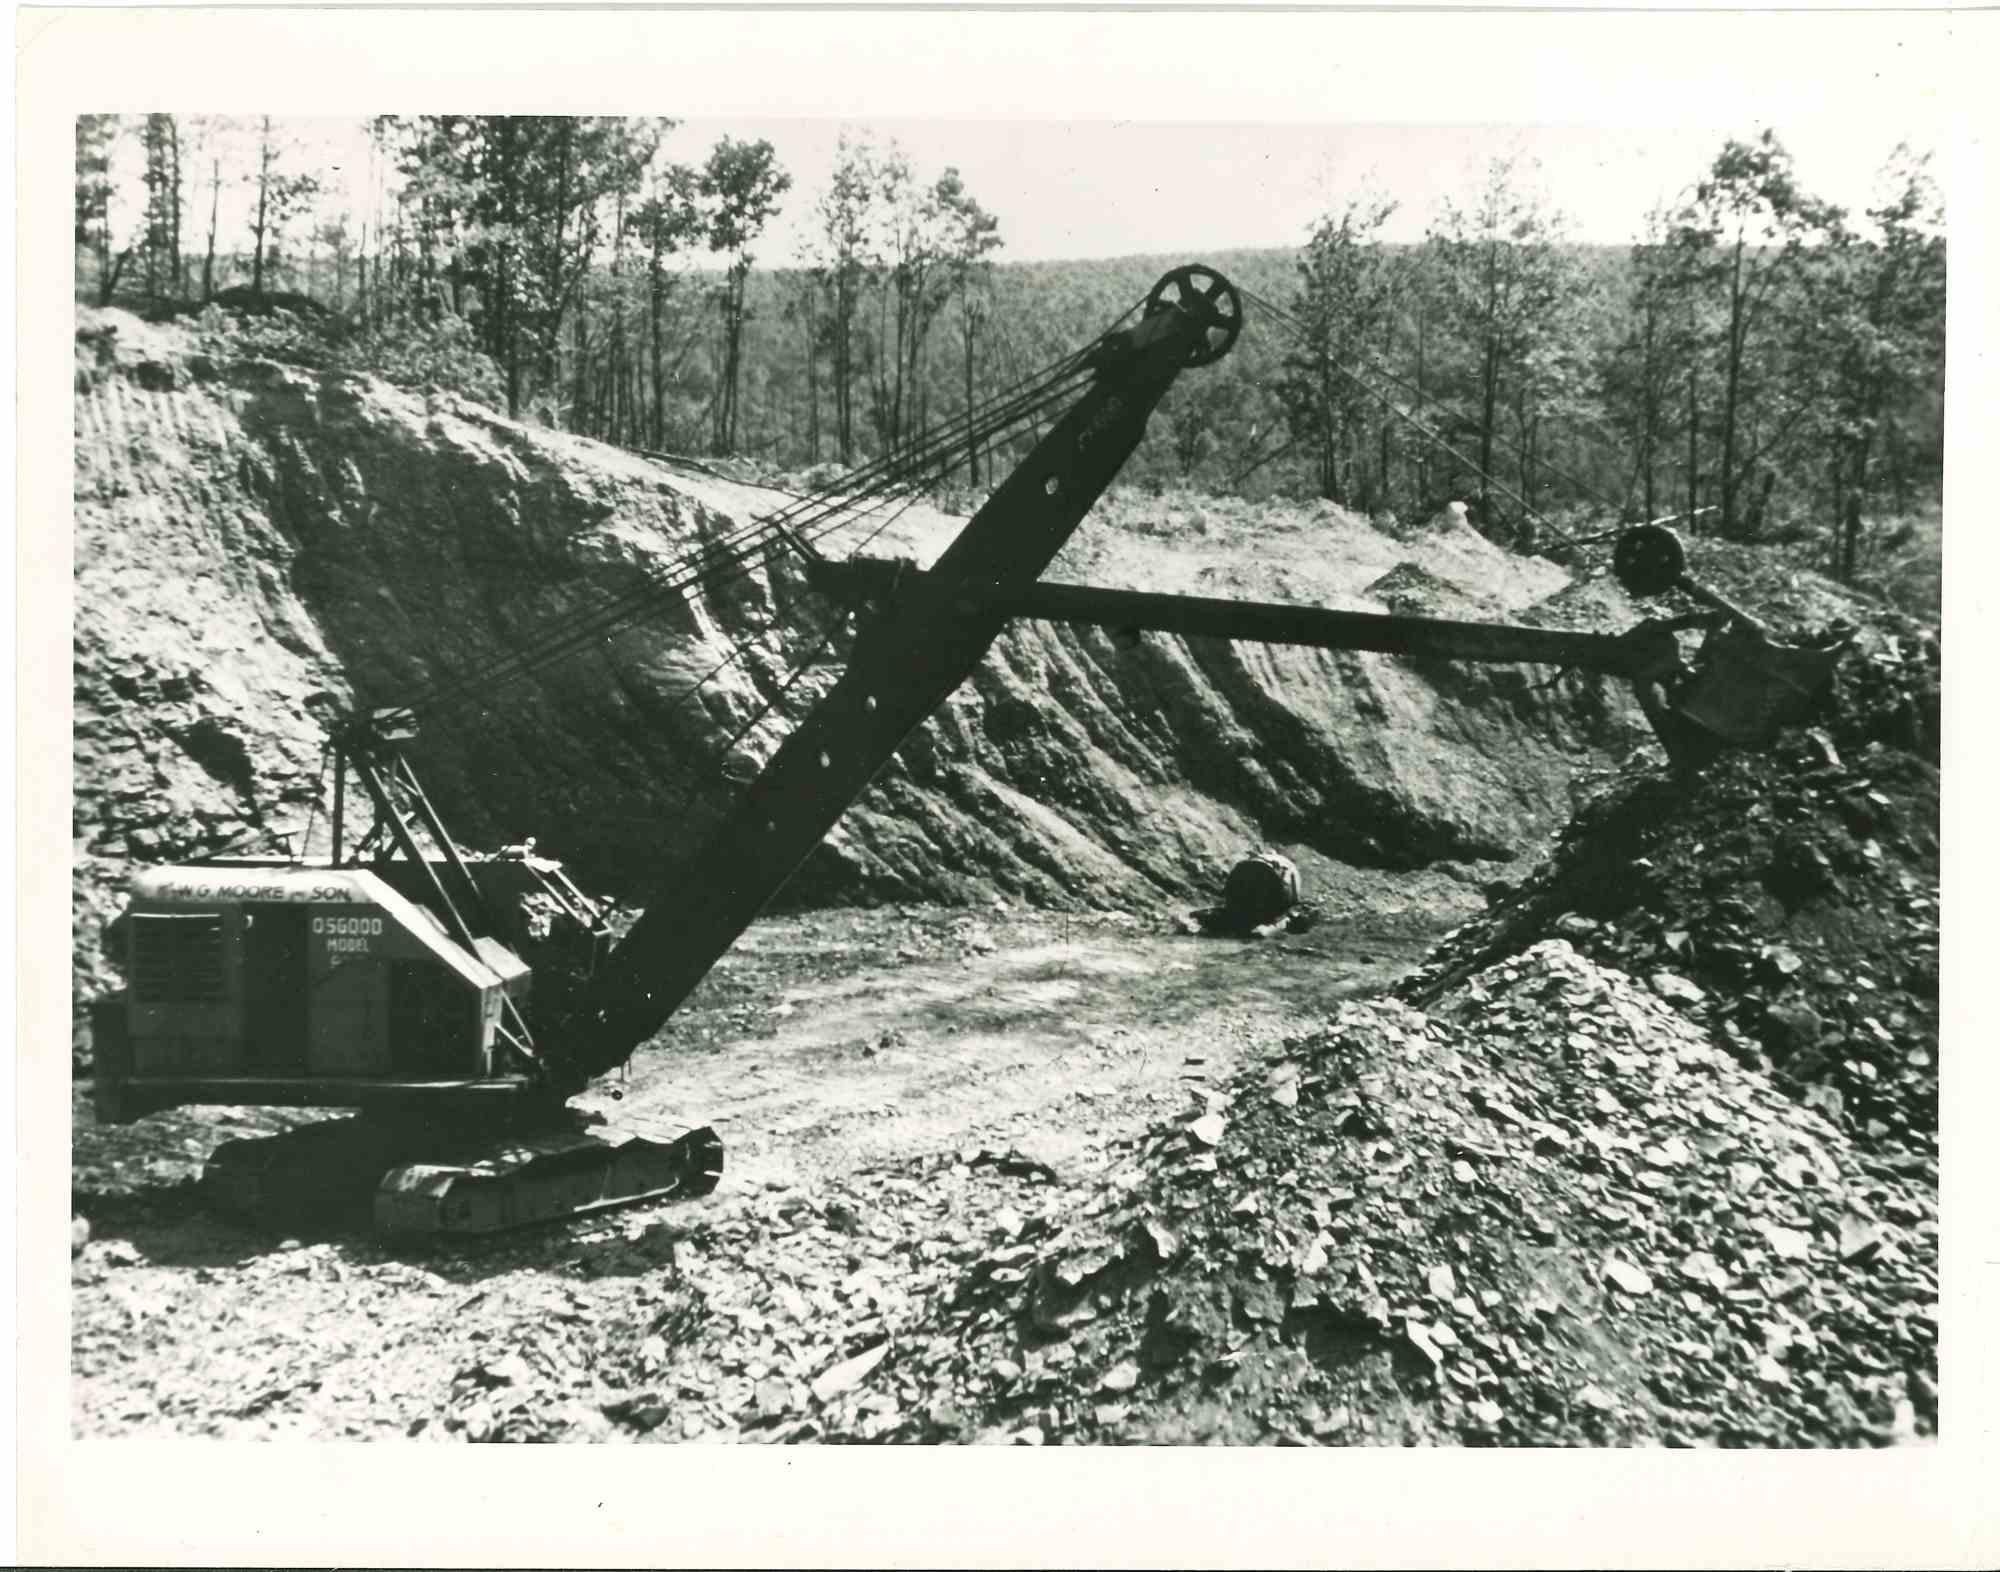 Unknown Figurative Photograph - Strip Mining in American Coal - Vintage Photograph - Mid 20th Century